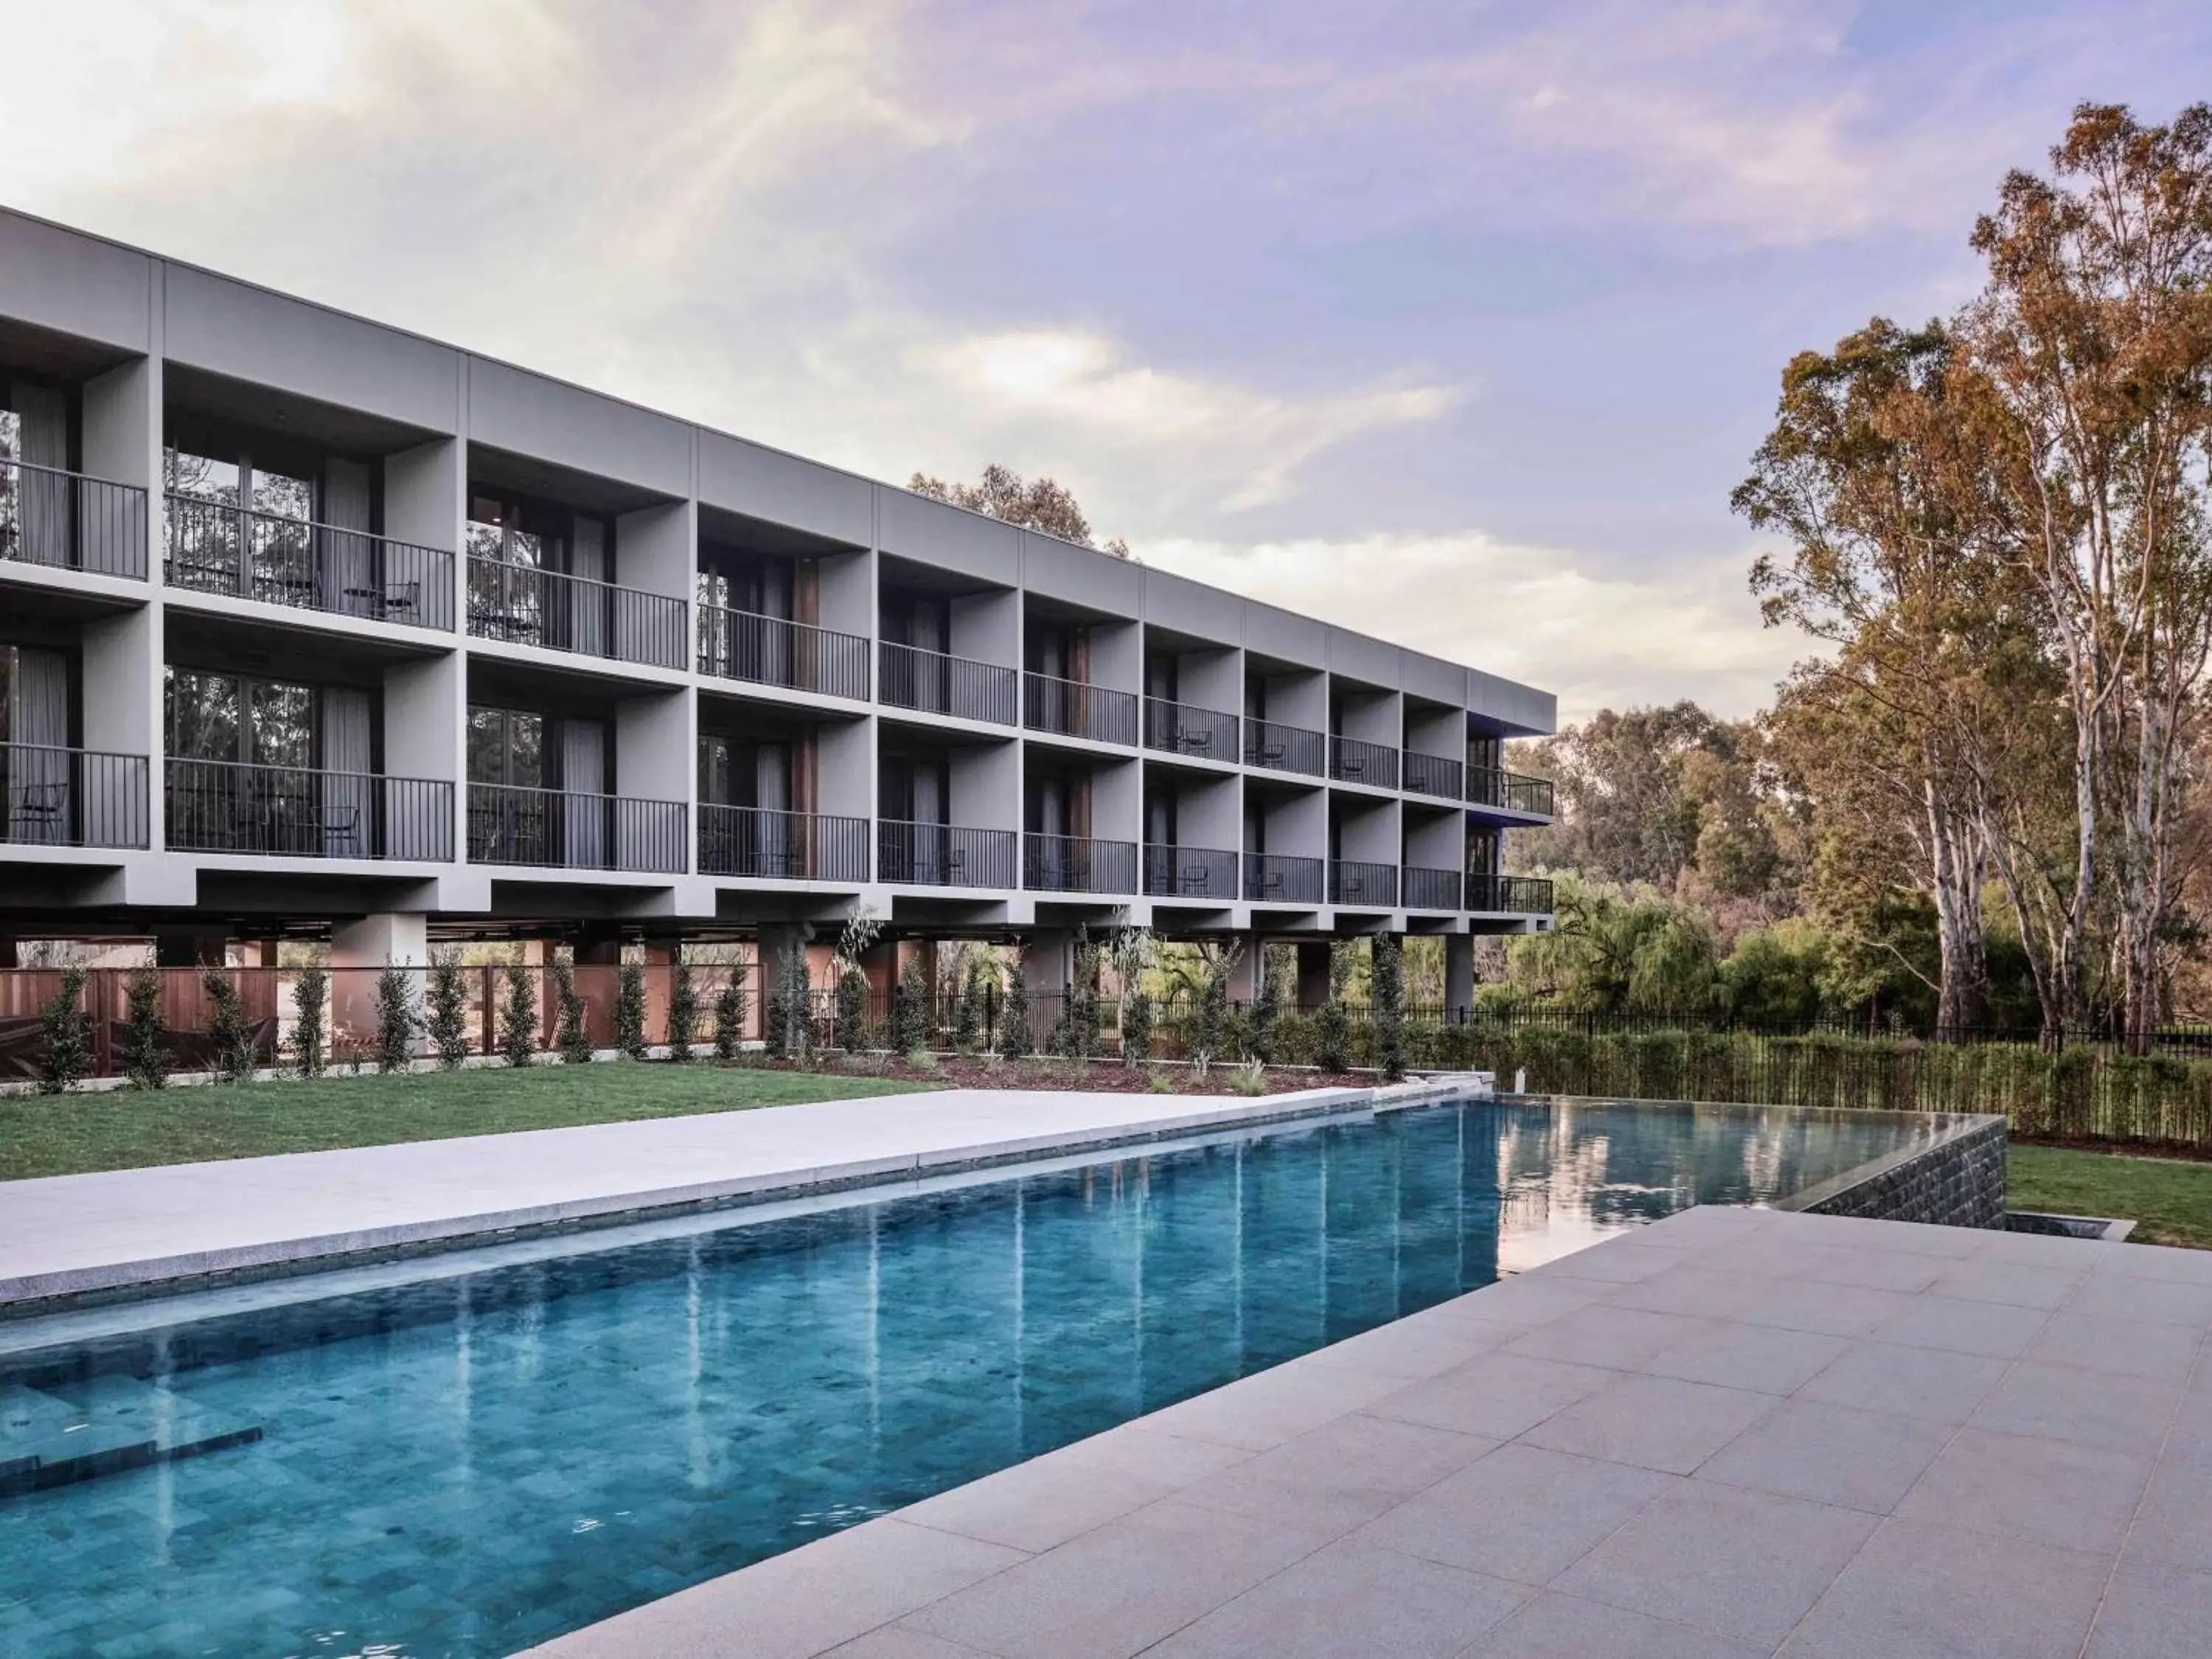 On site, Swimming Pool in The Mitchelton Hotel Nagambie - MGallery by Sofitel